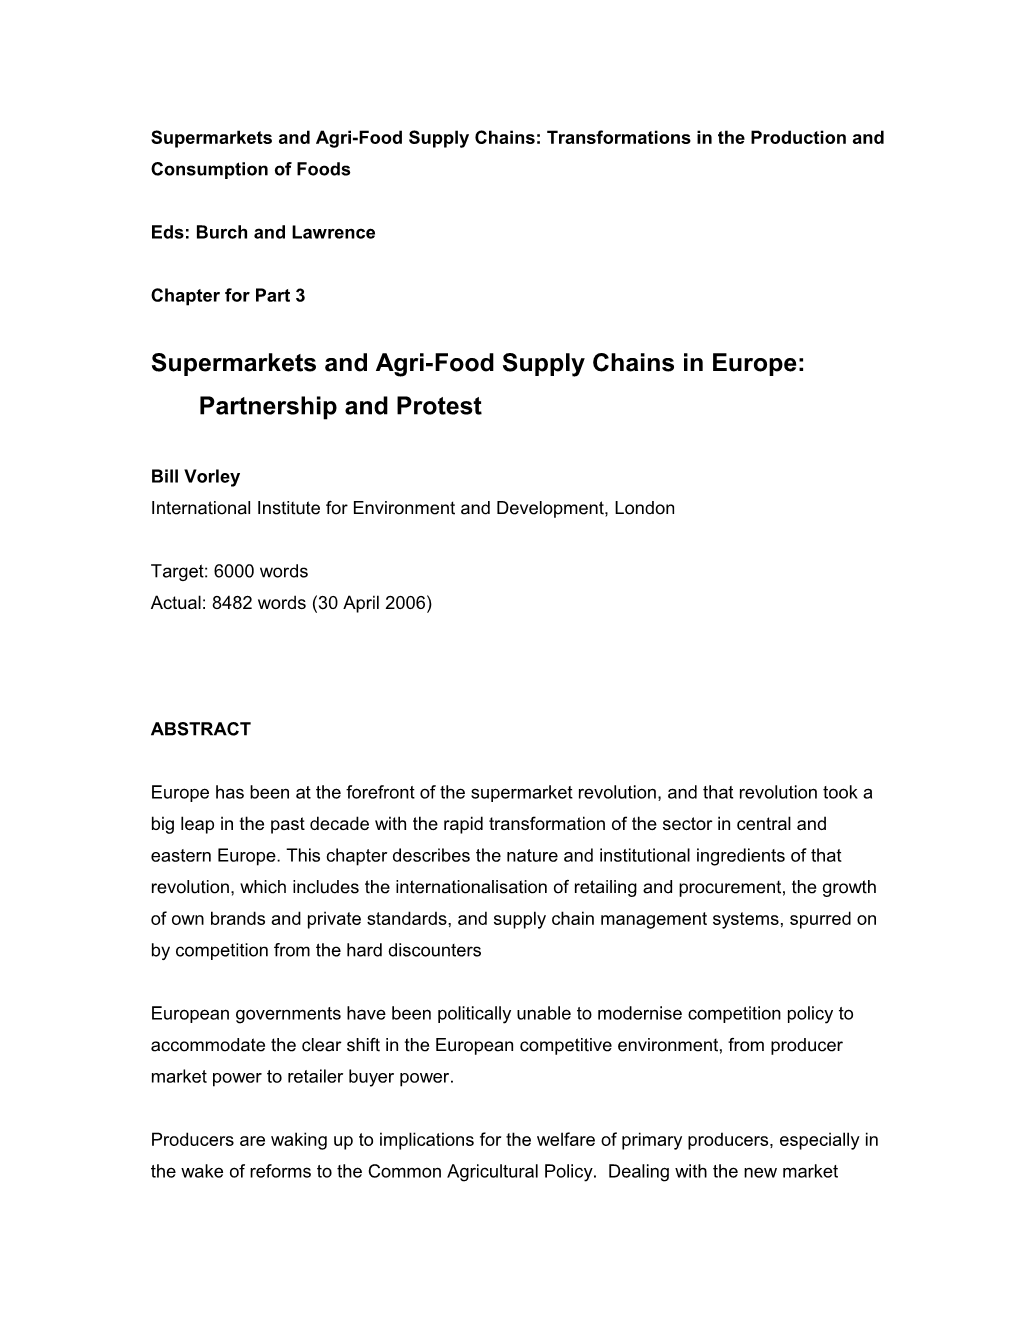 Supermarkets and Agri-Food Supply Chains: Transformations in the Production and Consumption